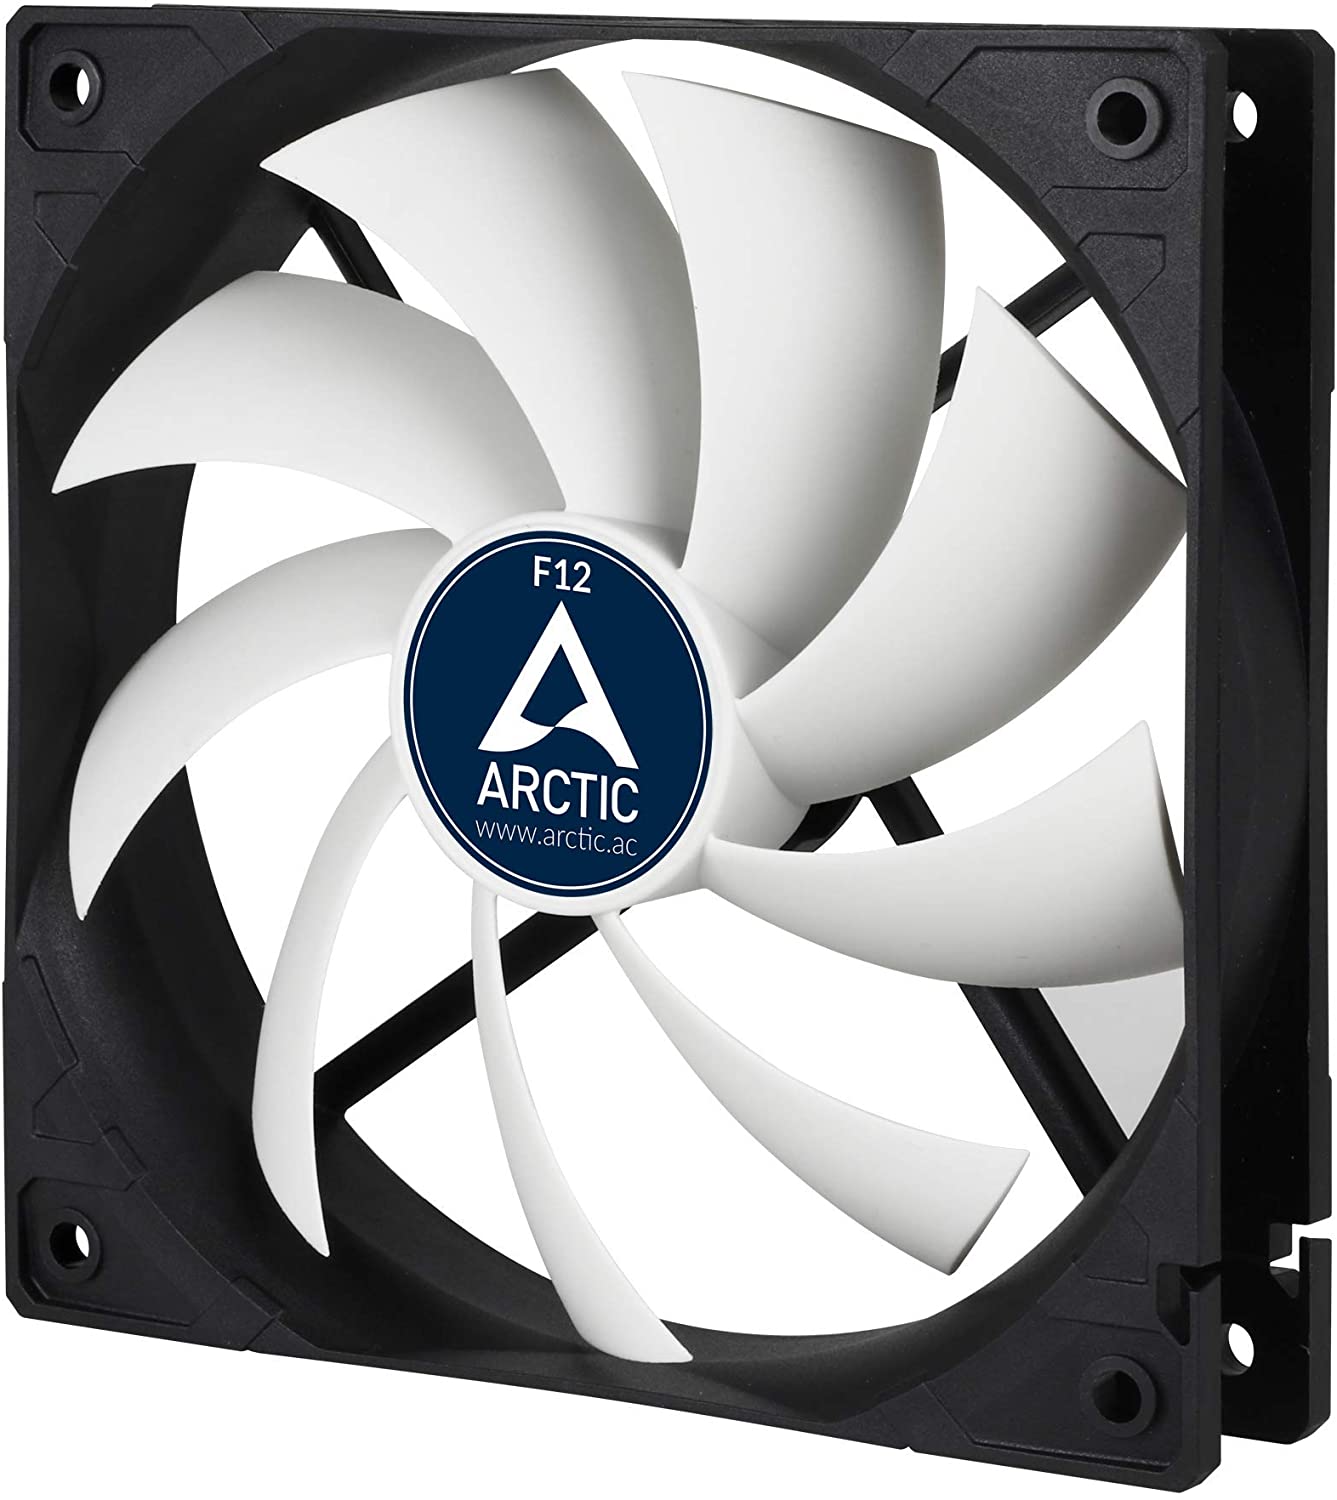 The Best Fans for your PC